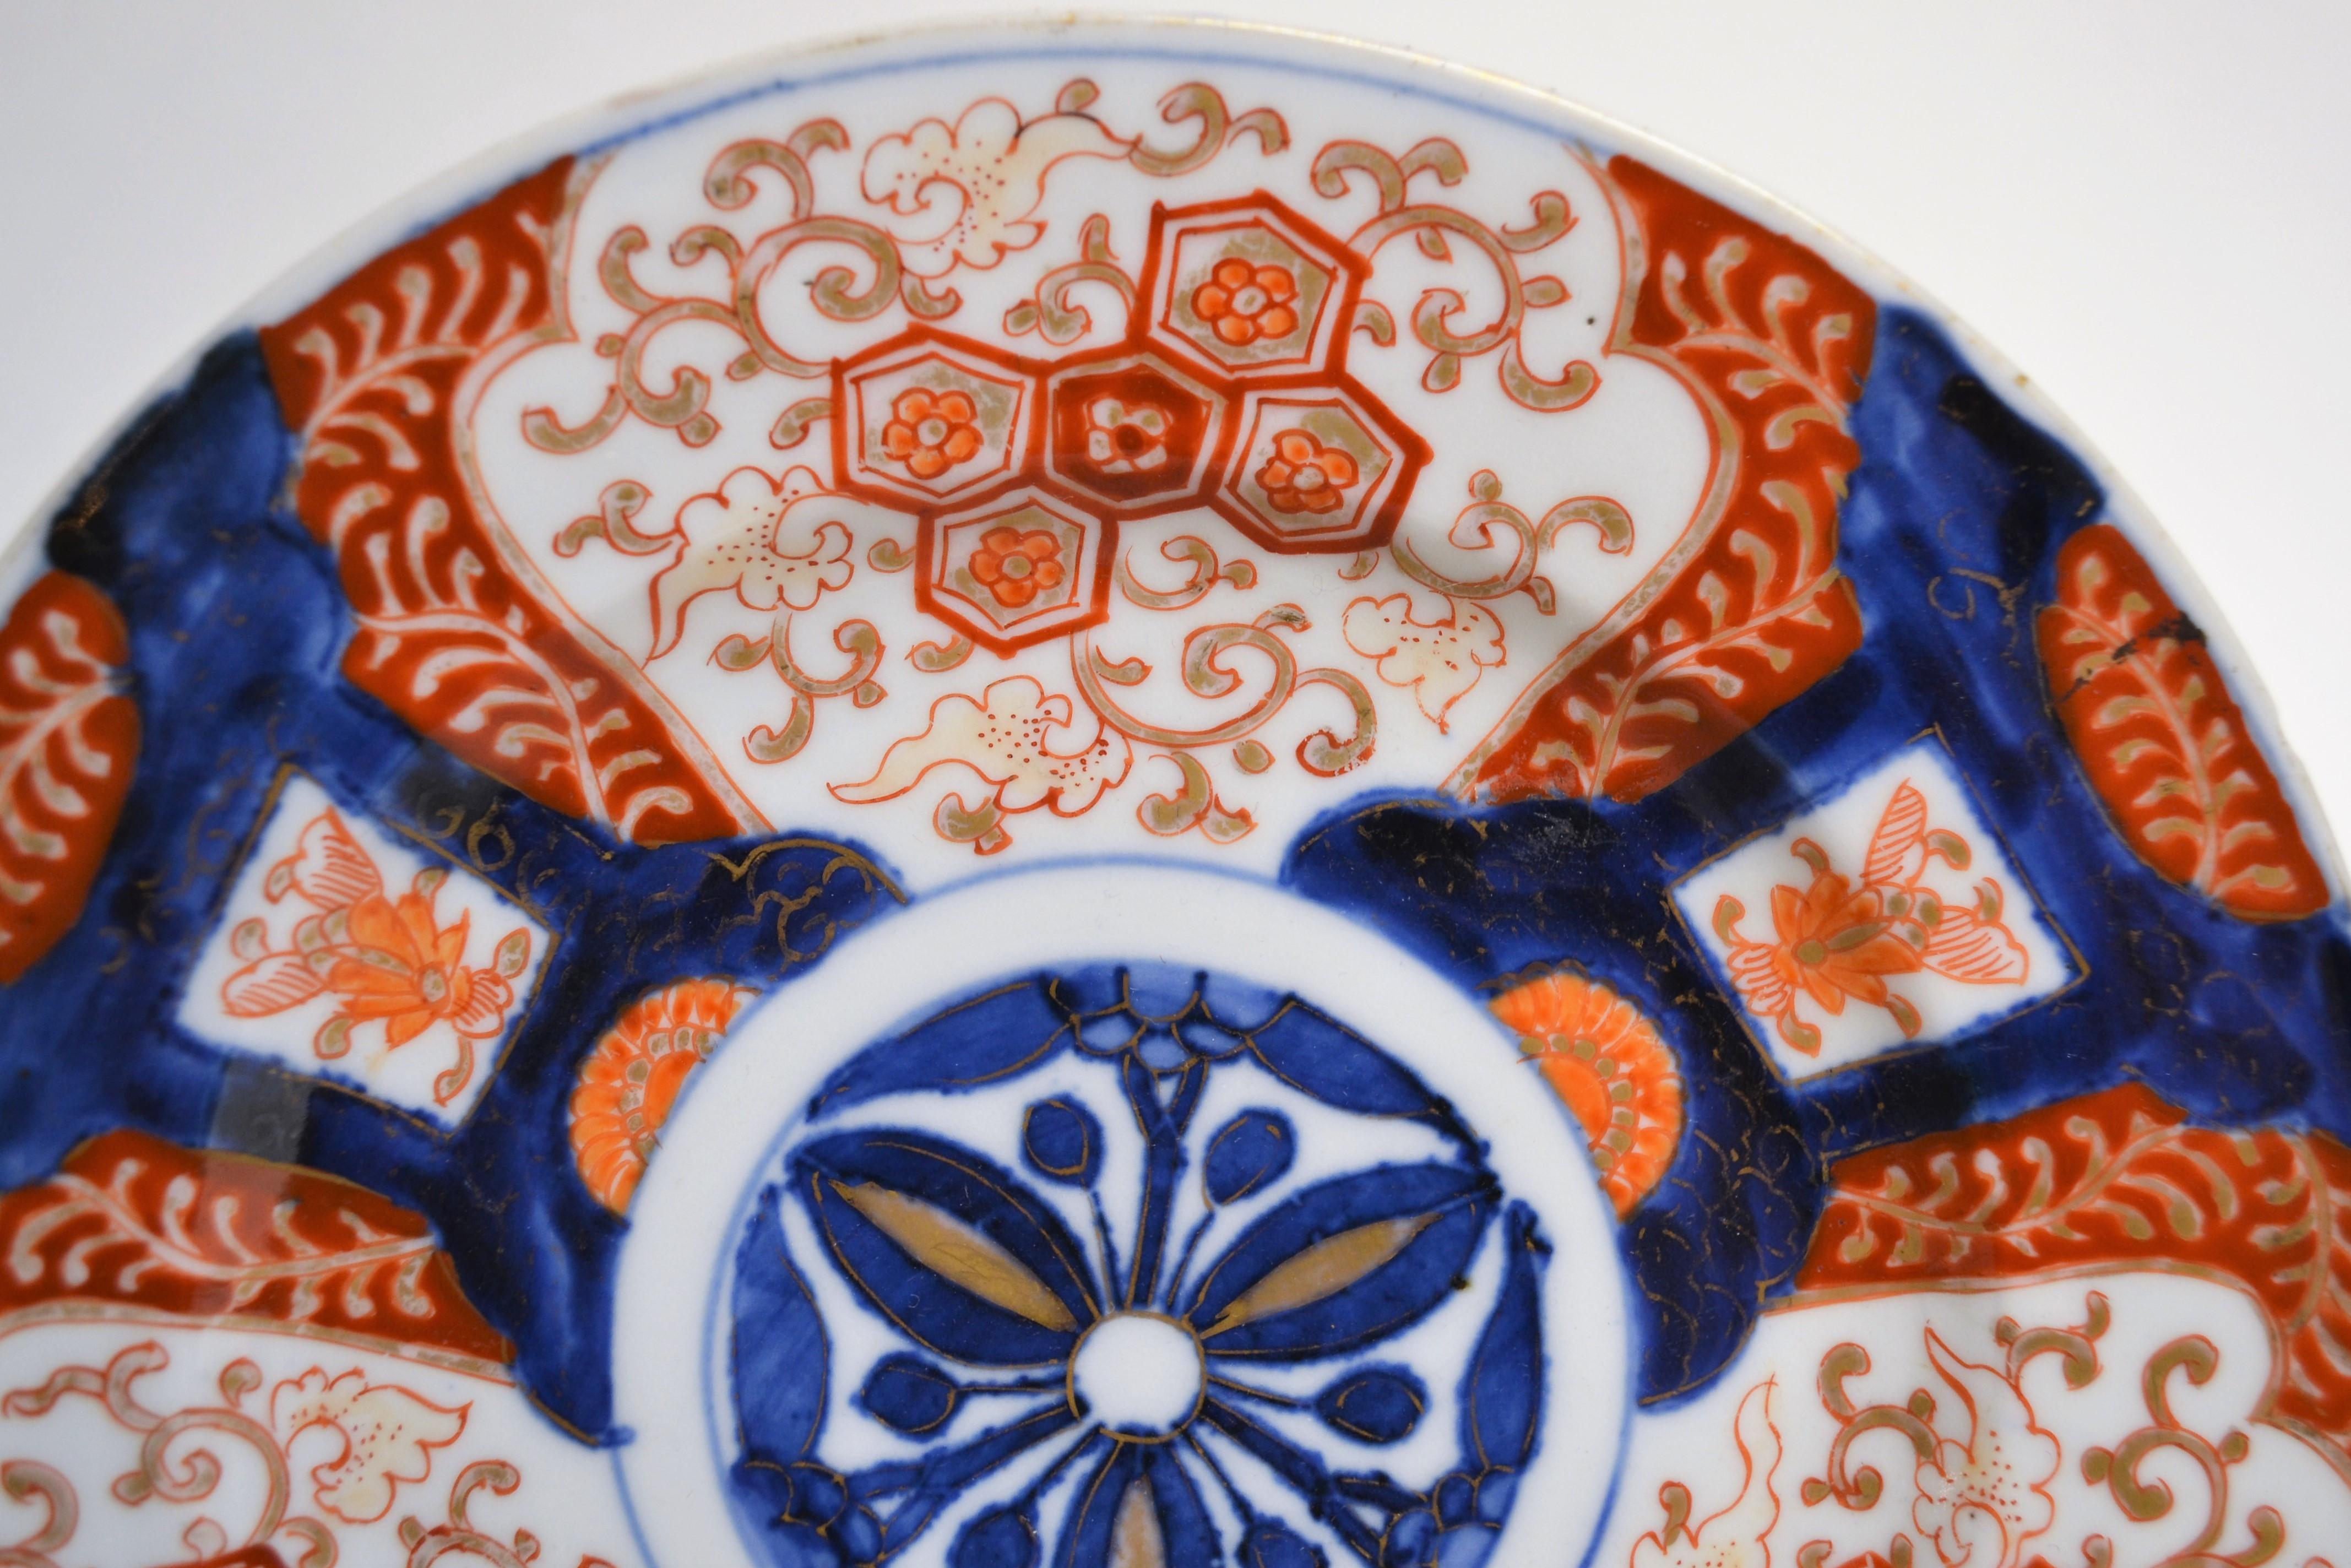 A lovely plate typical of the handsome and appealing Imari style.